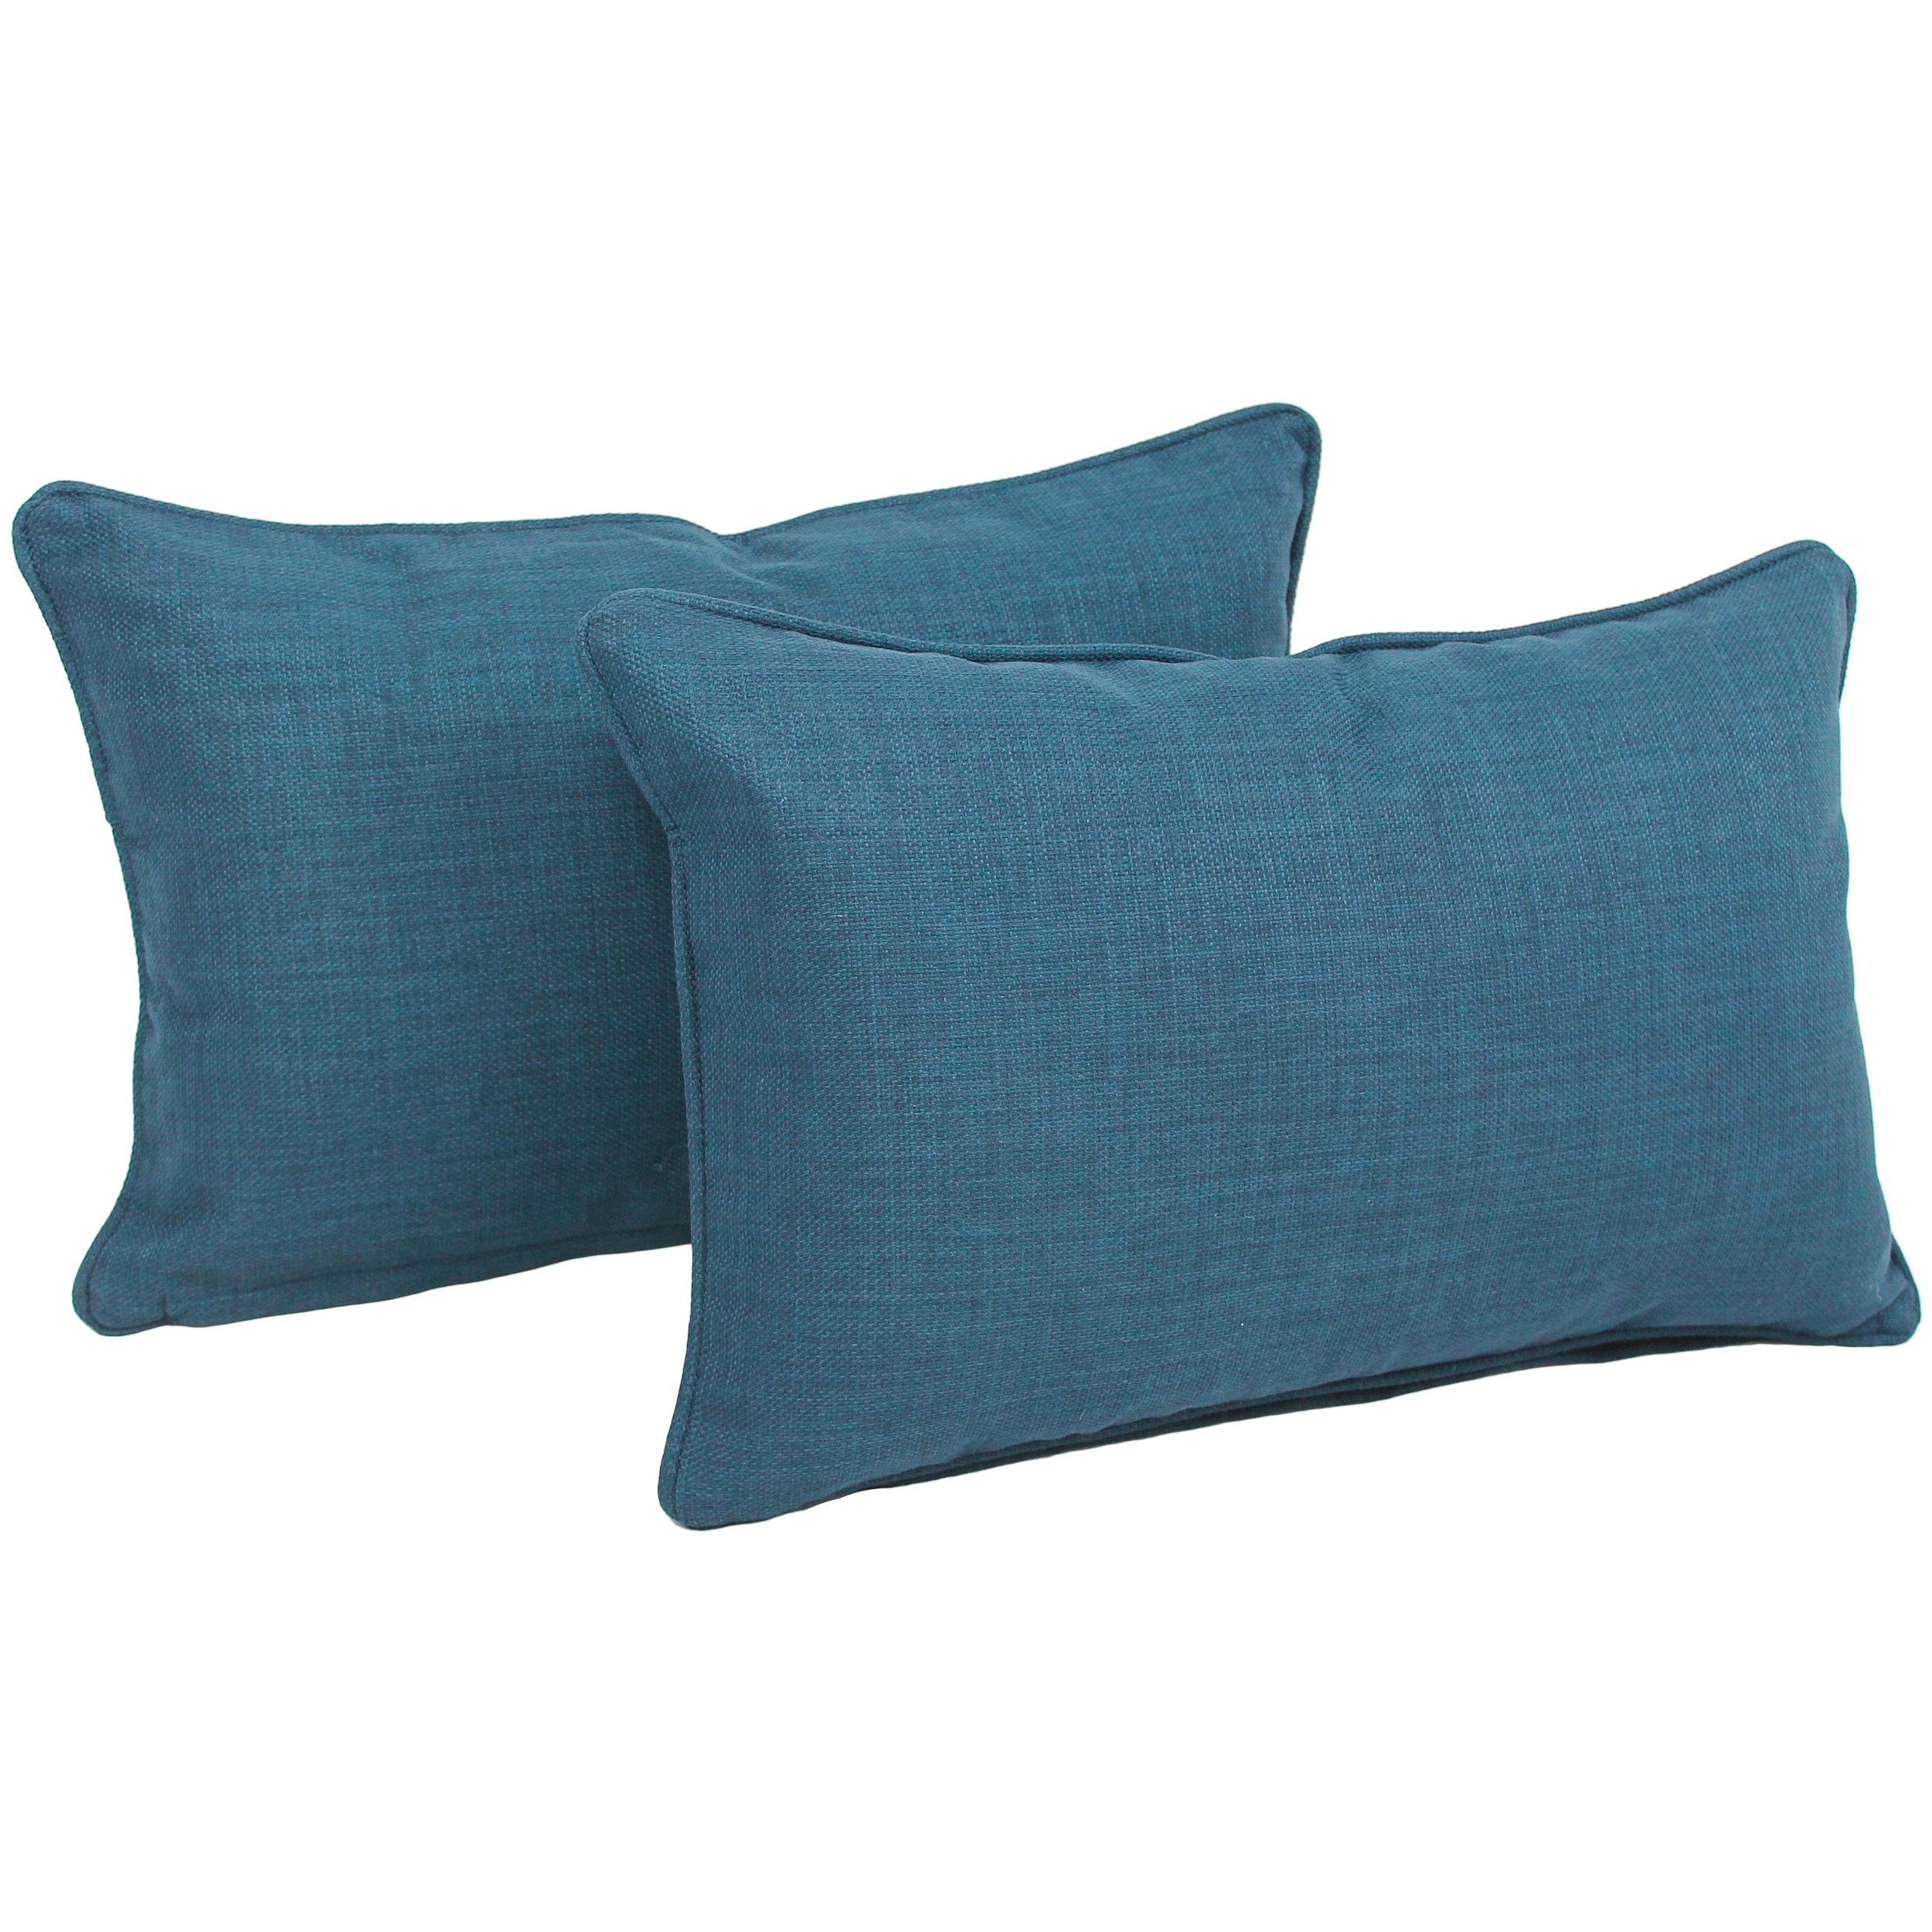 Teal Lumbar Pillow for Back Support, Green & Blue Decorative Pillow for  Bed, Large Couch Pillows Set, Accent Sofa Cushion or Outdoor Lumbar 